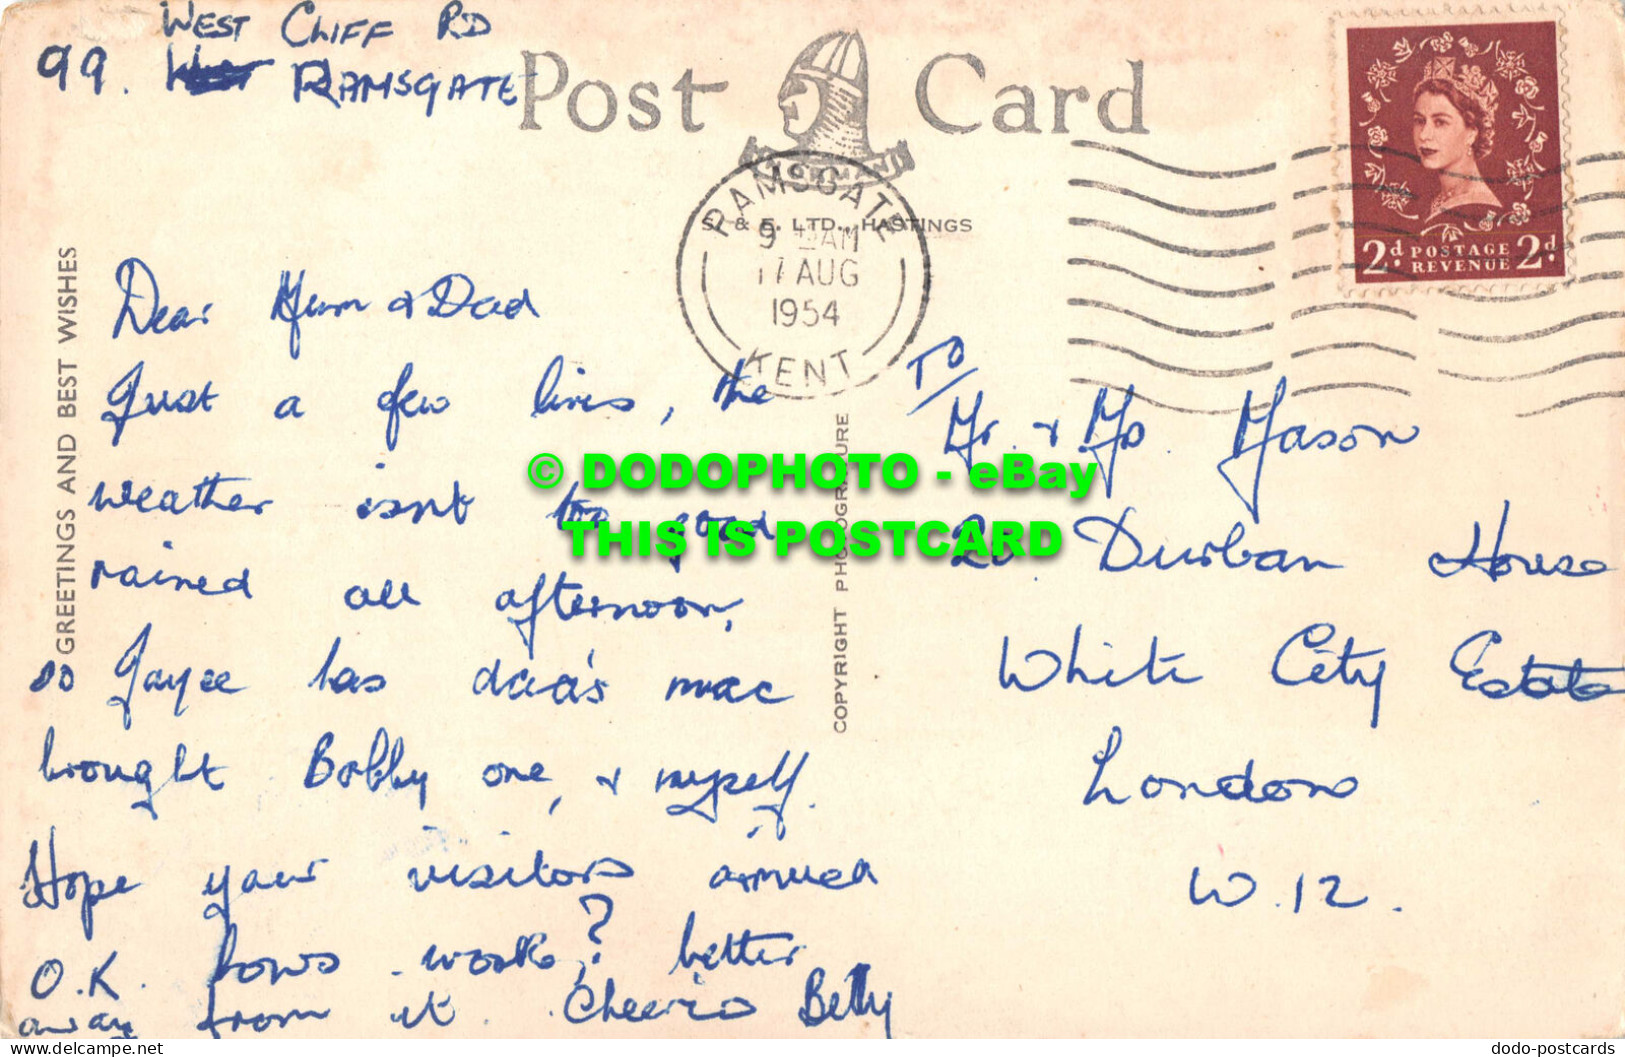 R548683 Ramsgate. Harbour And West Cliff. Dumpton Bay. Sands. Norman. Multi View - Wereld